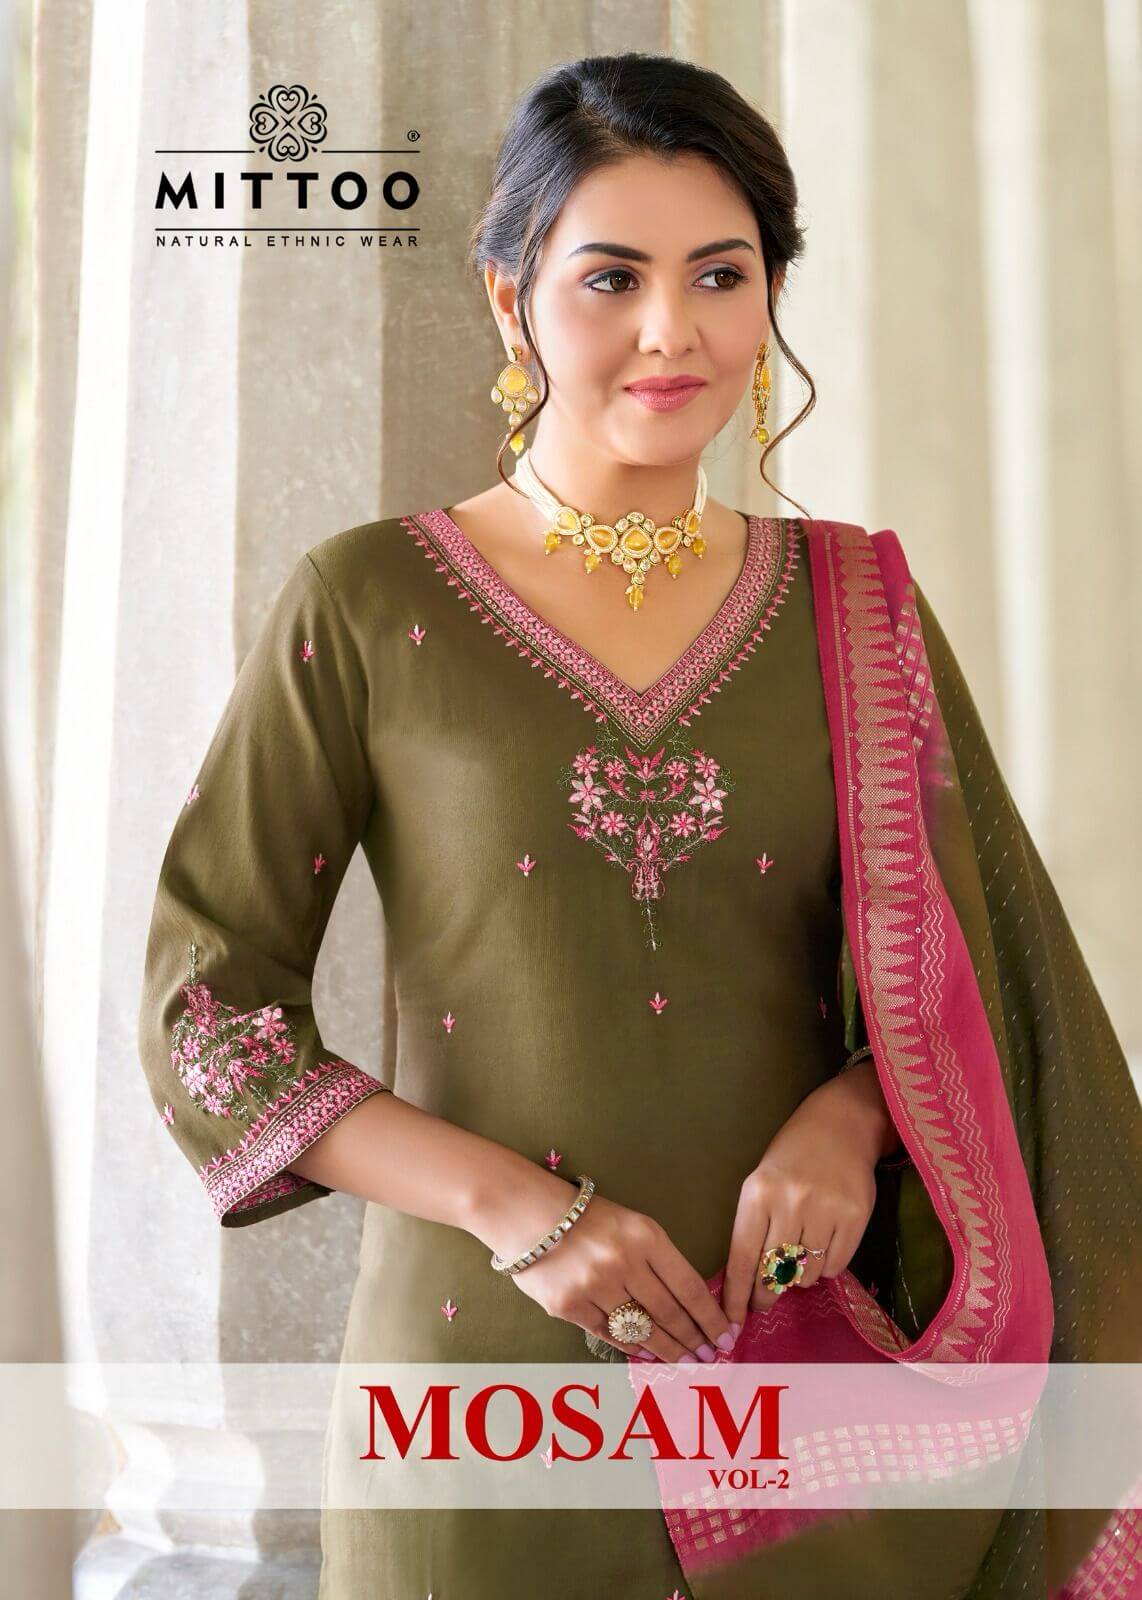 Mittoo Mosam Vol 2 Embroidery Salwar Kameez Catalog collection 11